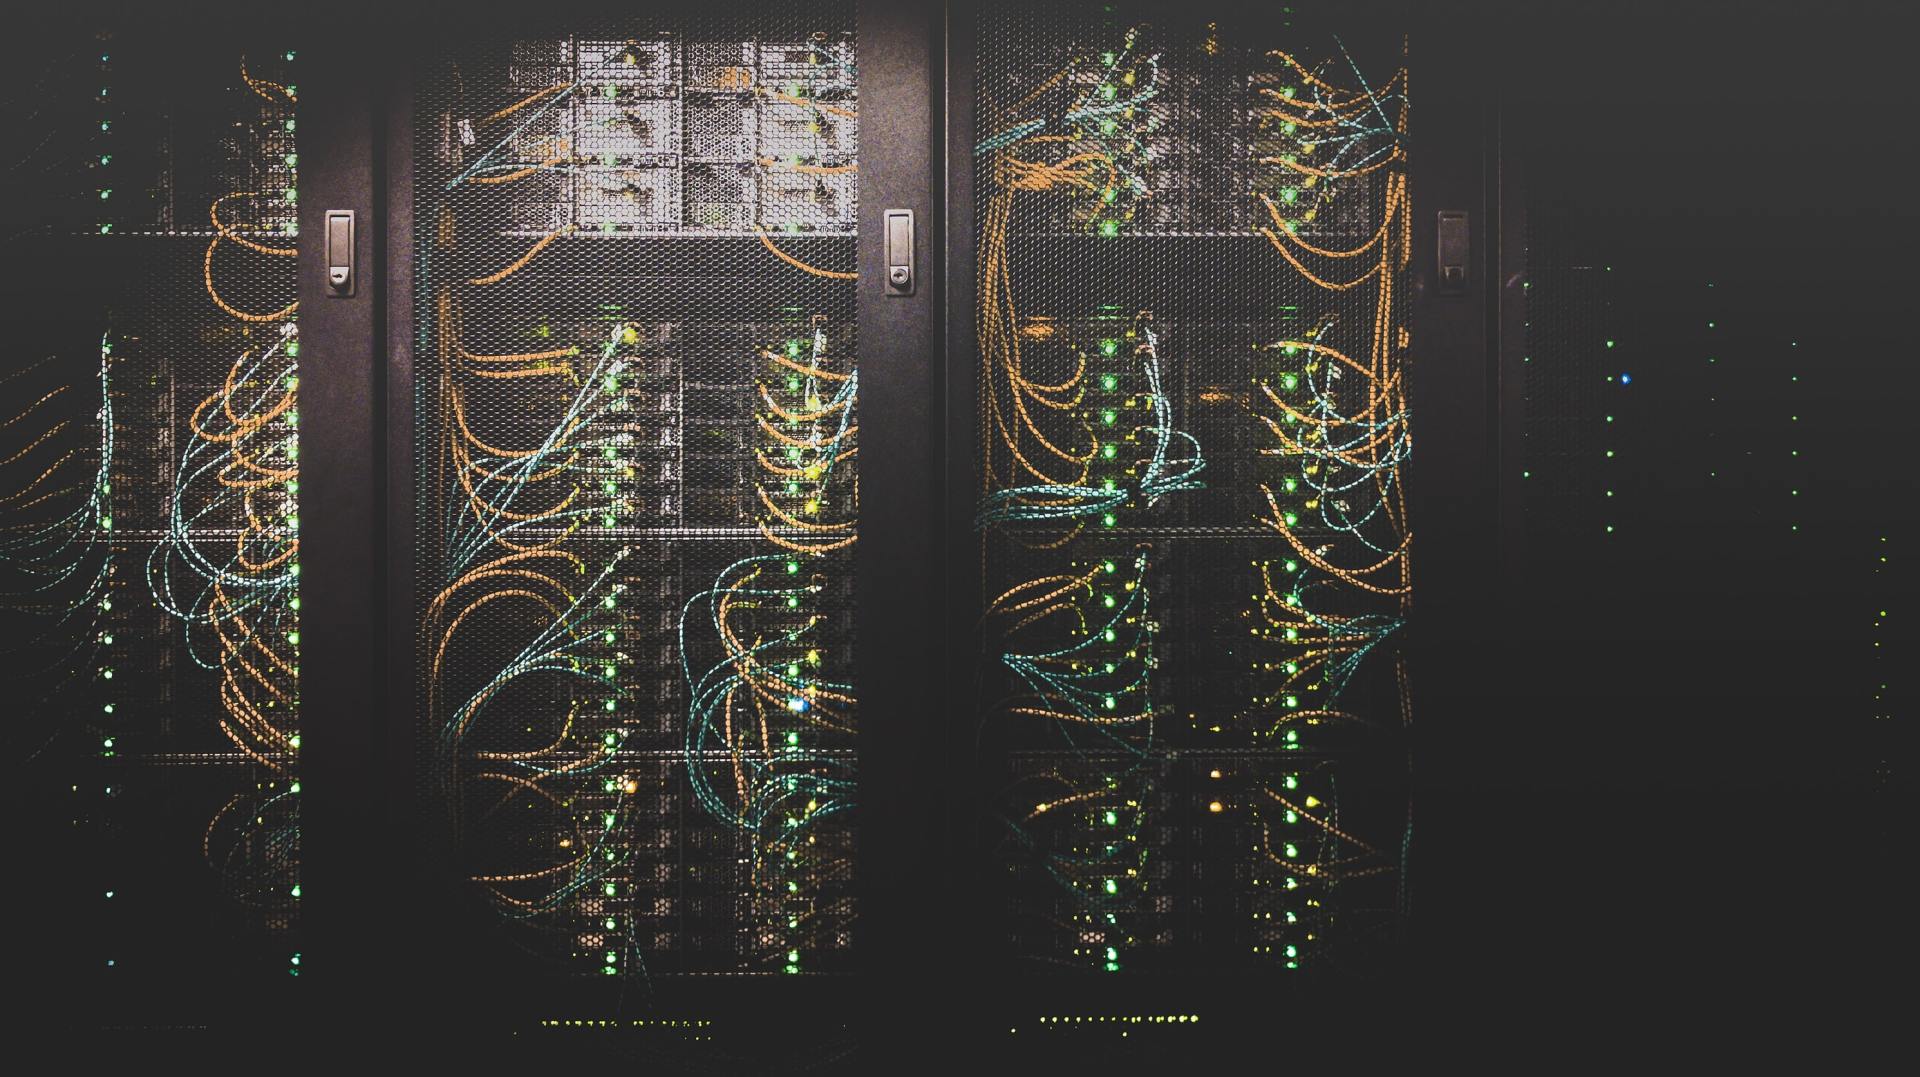 A collection of servers wired up